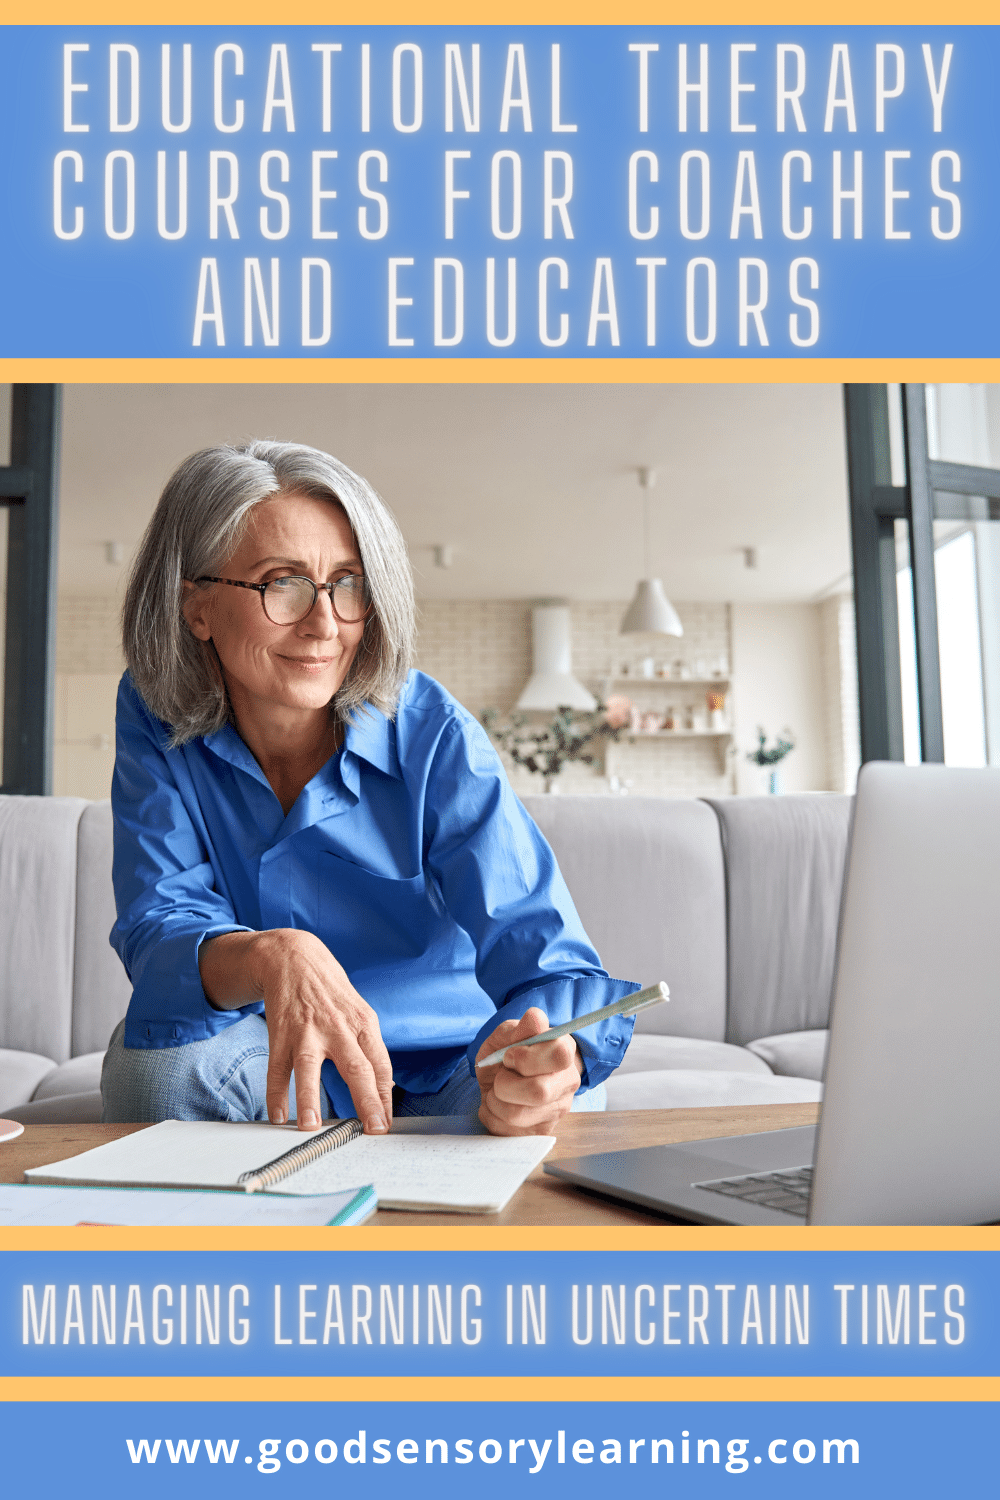 Educational therapist taking online classes